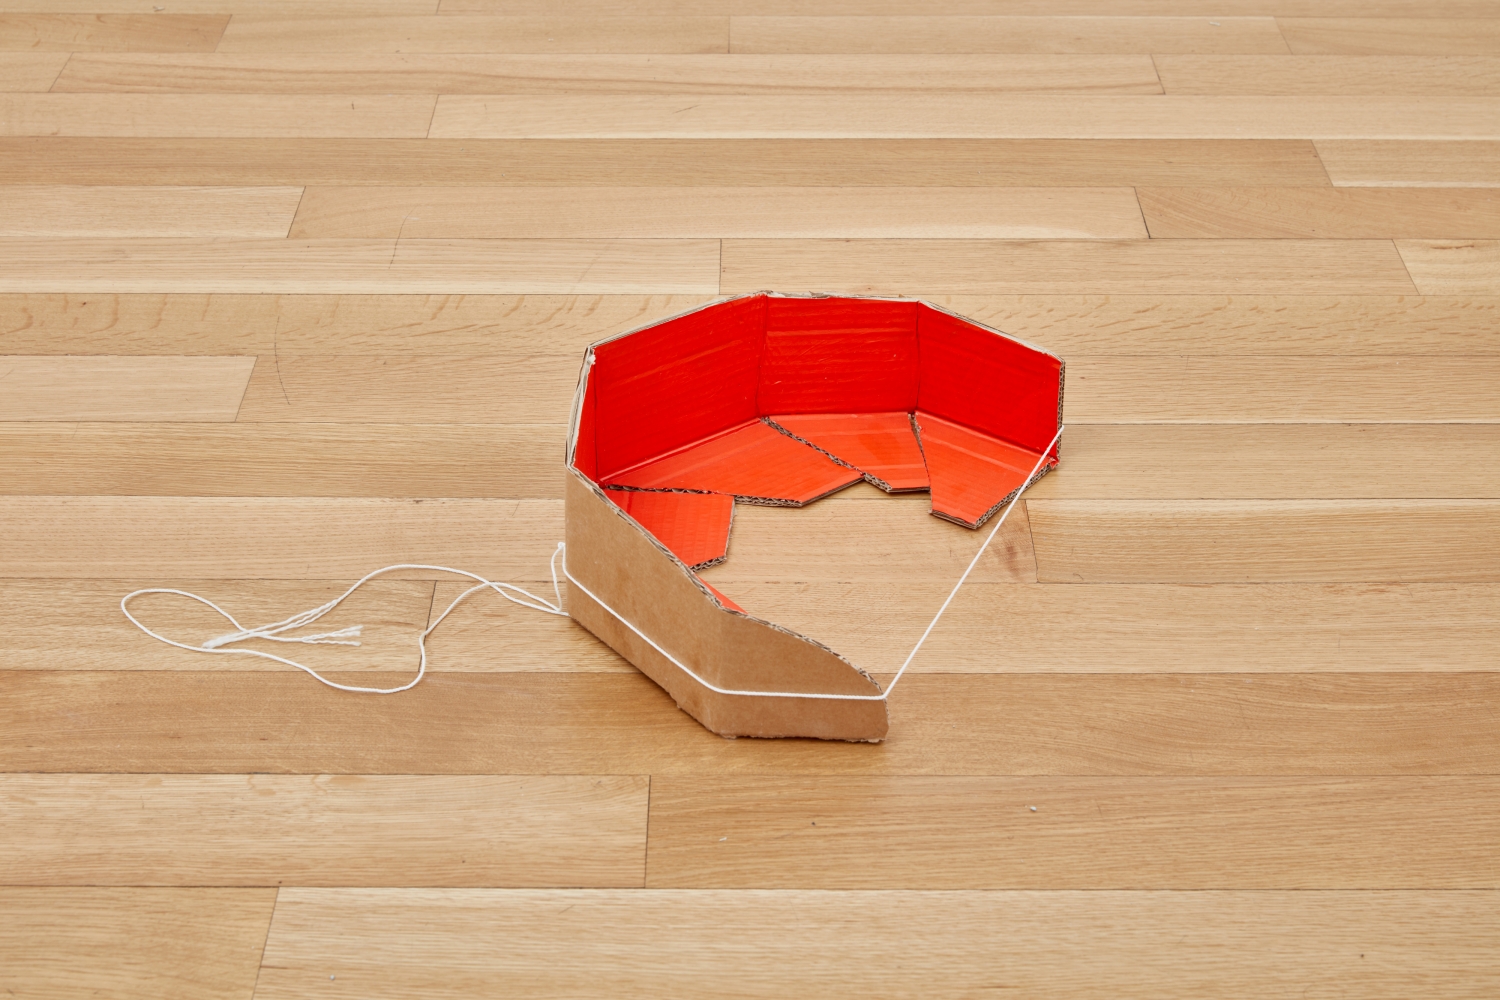 
Esther Kl&amp;auml;s
Tine, 2021
cardboard, paint, and string
16 1/8 x 11 3/8 x 4 3/4 inches (41 x 29 x 12 cm)